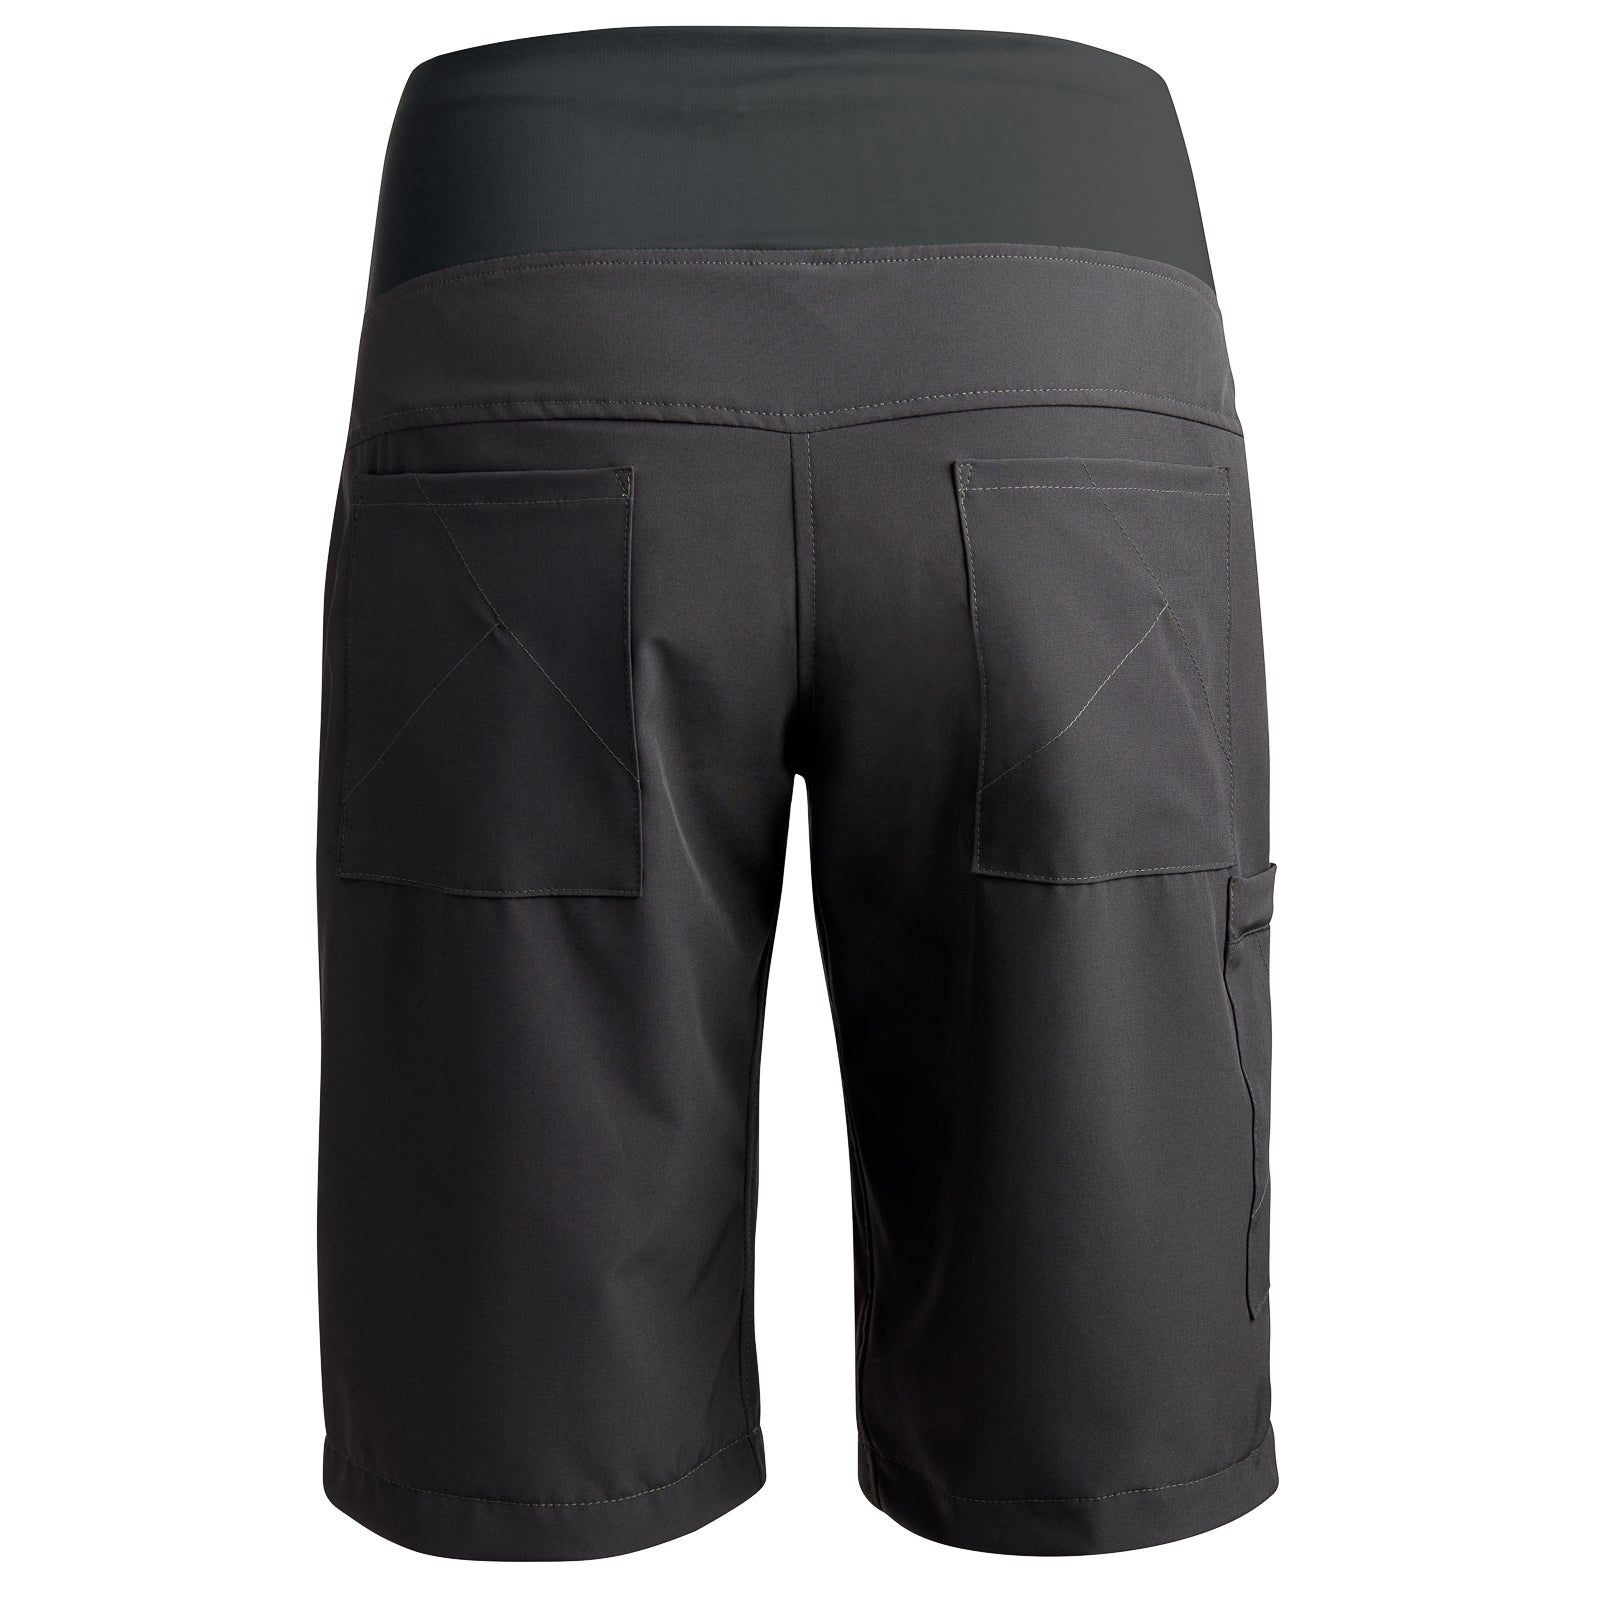 First Line of Mountain Bike Shorts Unveiled From Kaden Apparel - Pinner Short Back